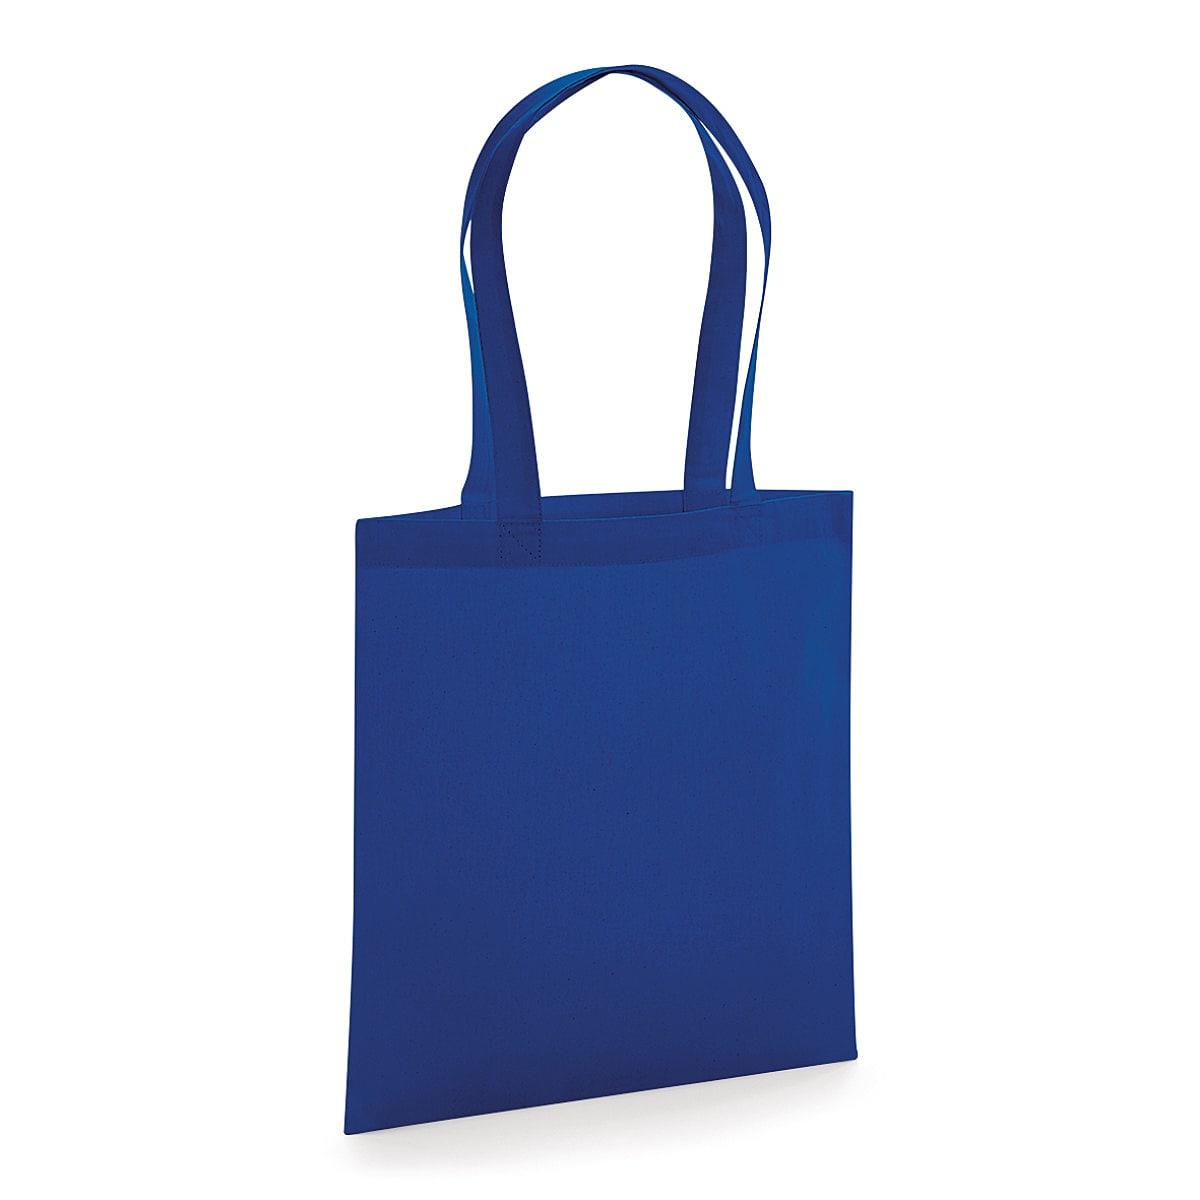 Westford Mill Organic Premium Cotton Tot in Bright Royal (Product Code: W261)